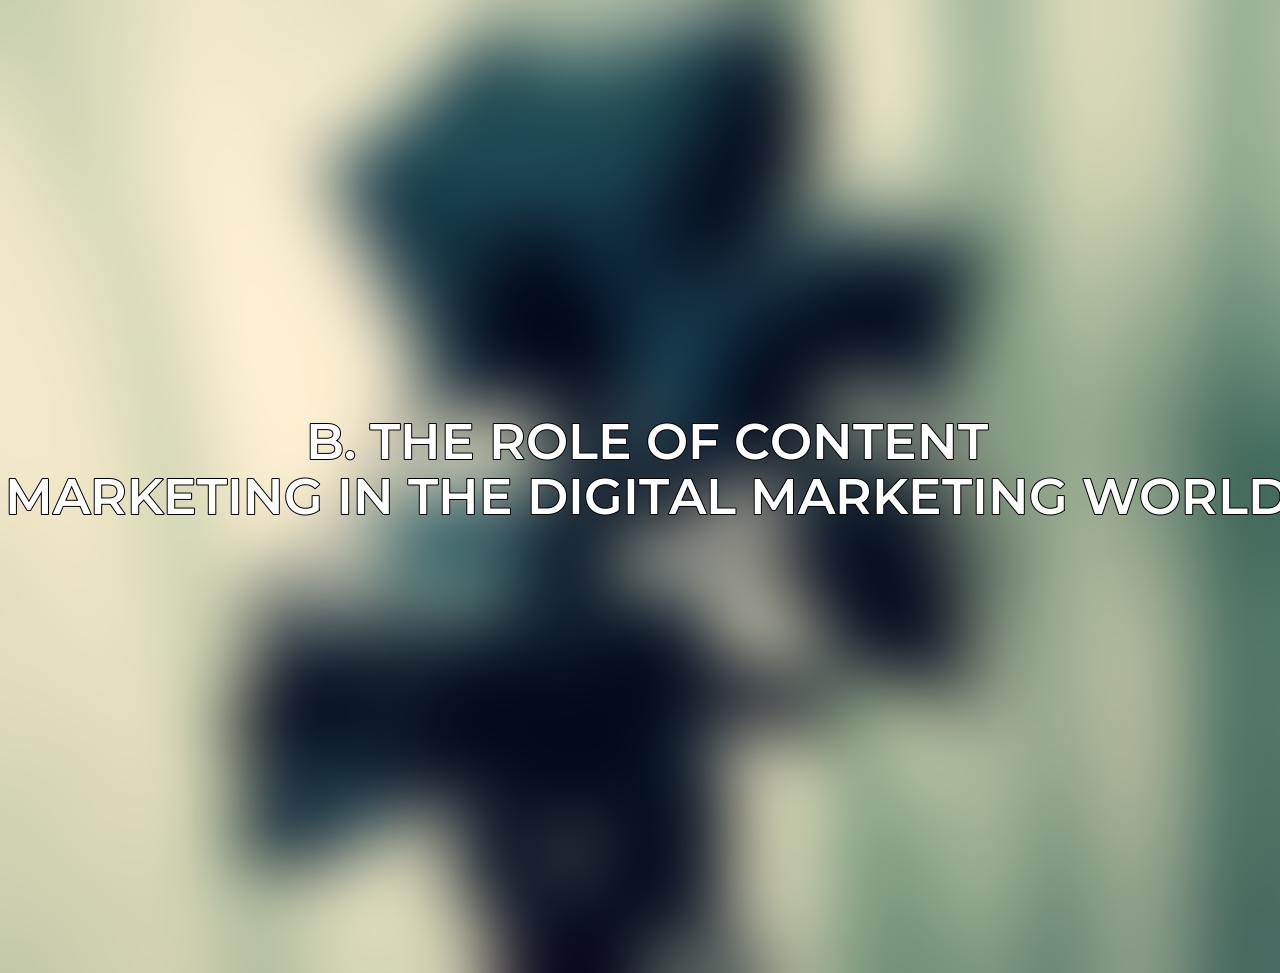 B. The role of Content Marketing in the digital marketing world